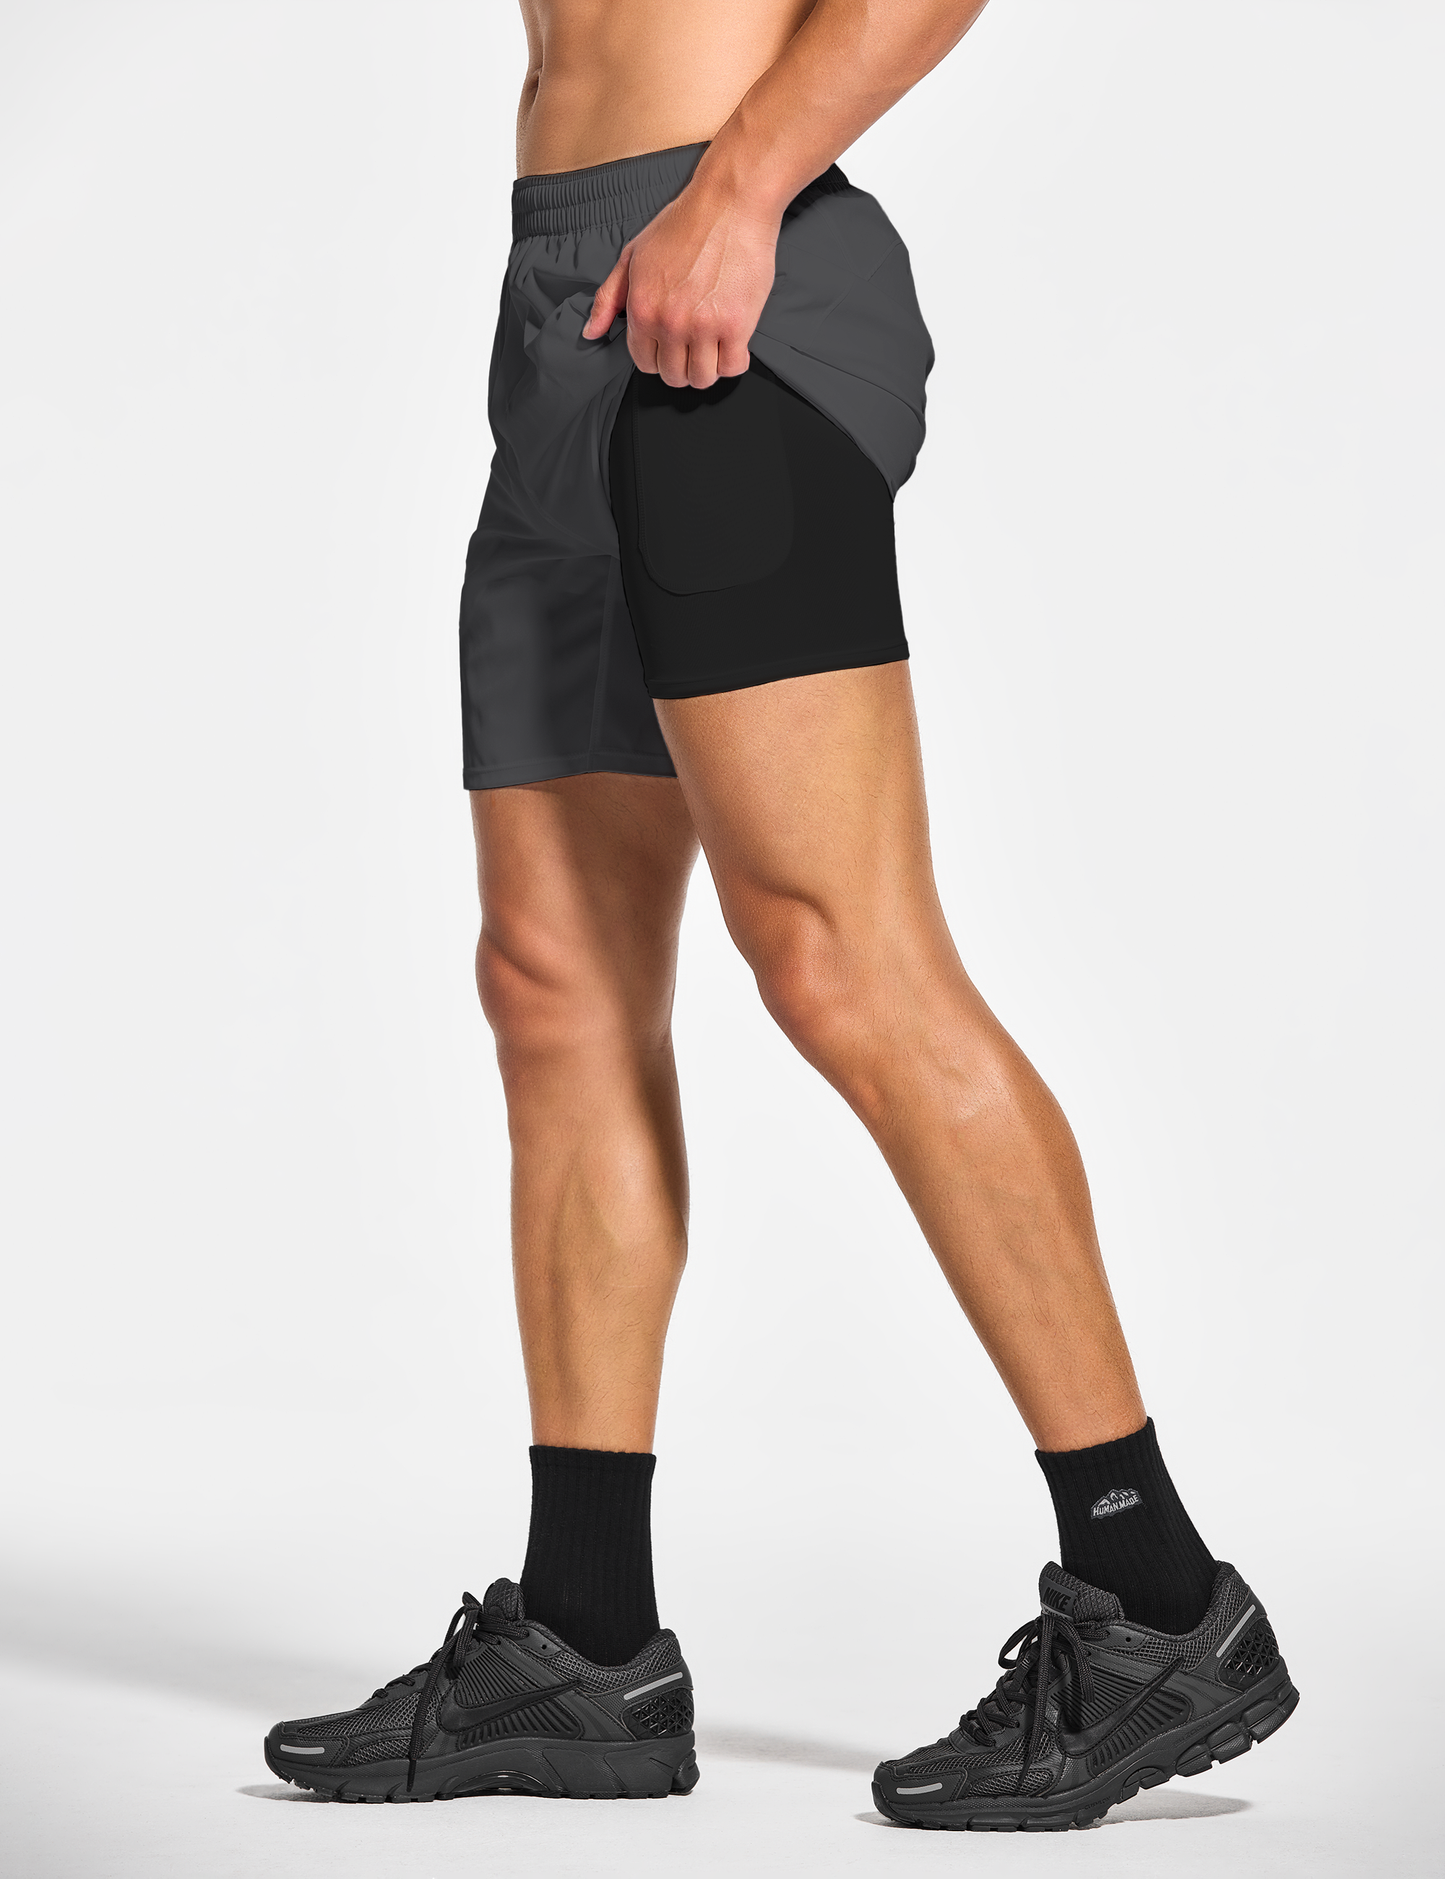 mens 7 inch lined workout running tennis gym shorts with pockets dark grey